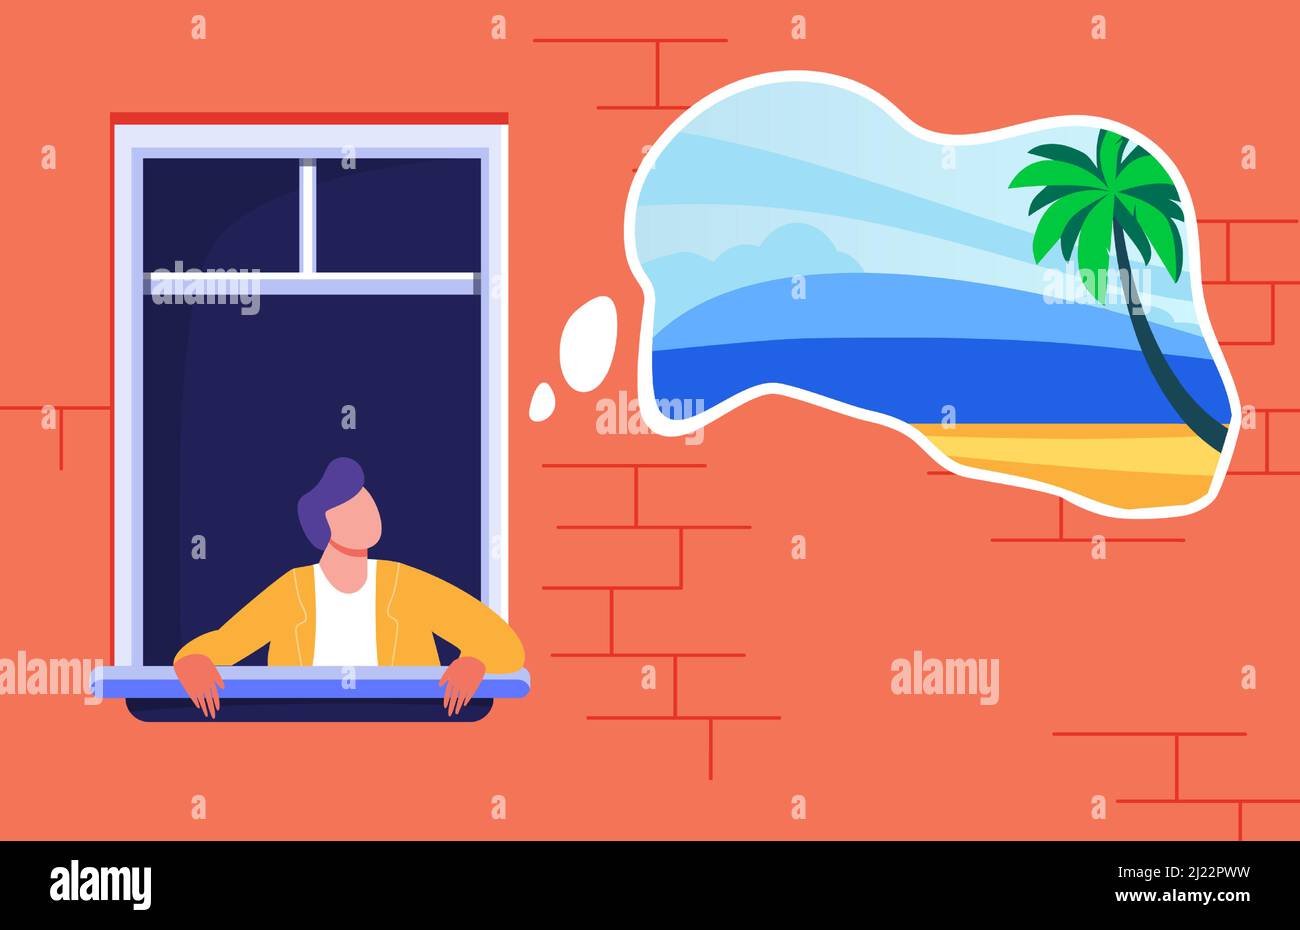 Man staying at home and dreaming about tropical vacation. Palms and beach in thought bubble flat vector illustration. Lockdown, travel ban concept for Stock Vector